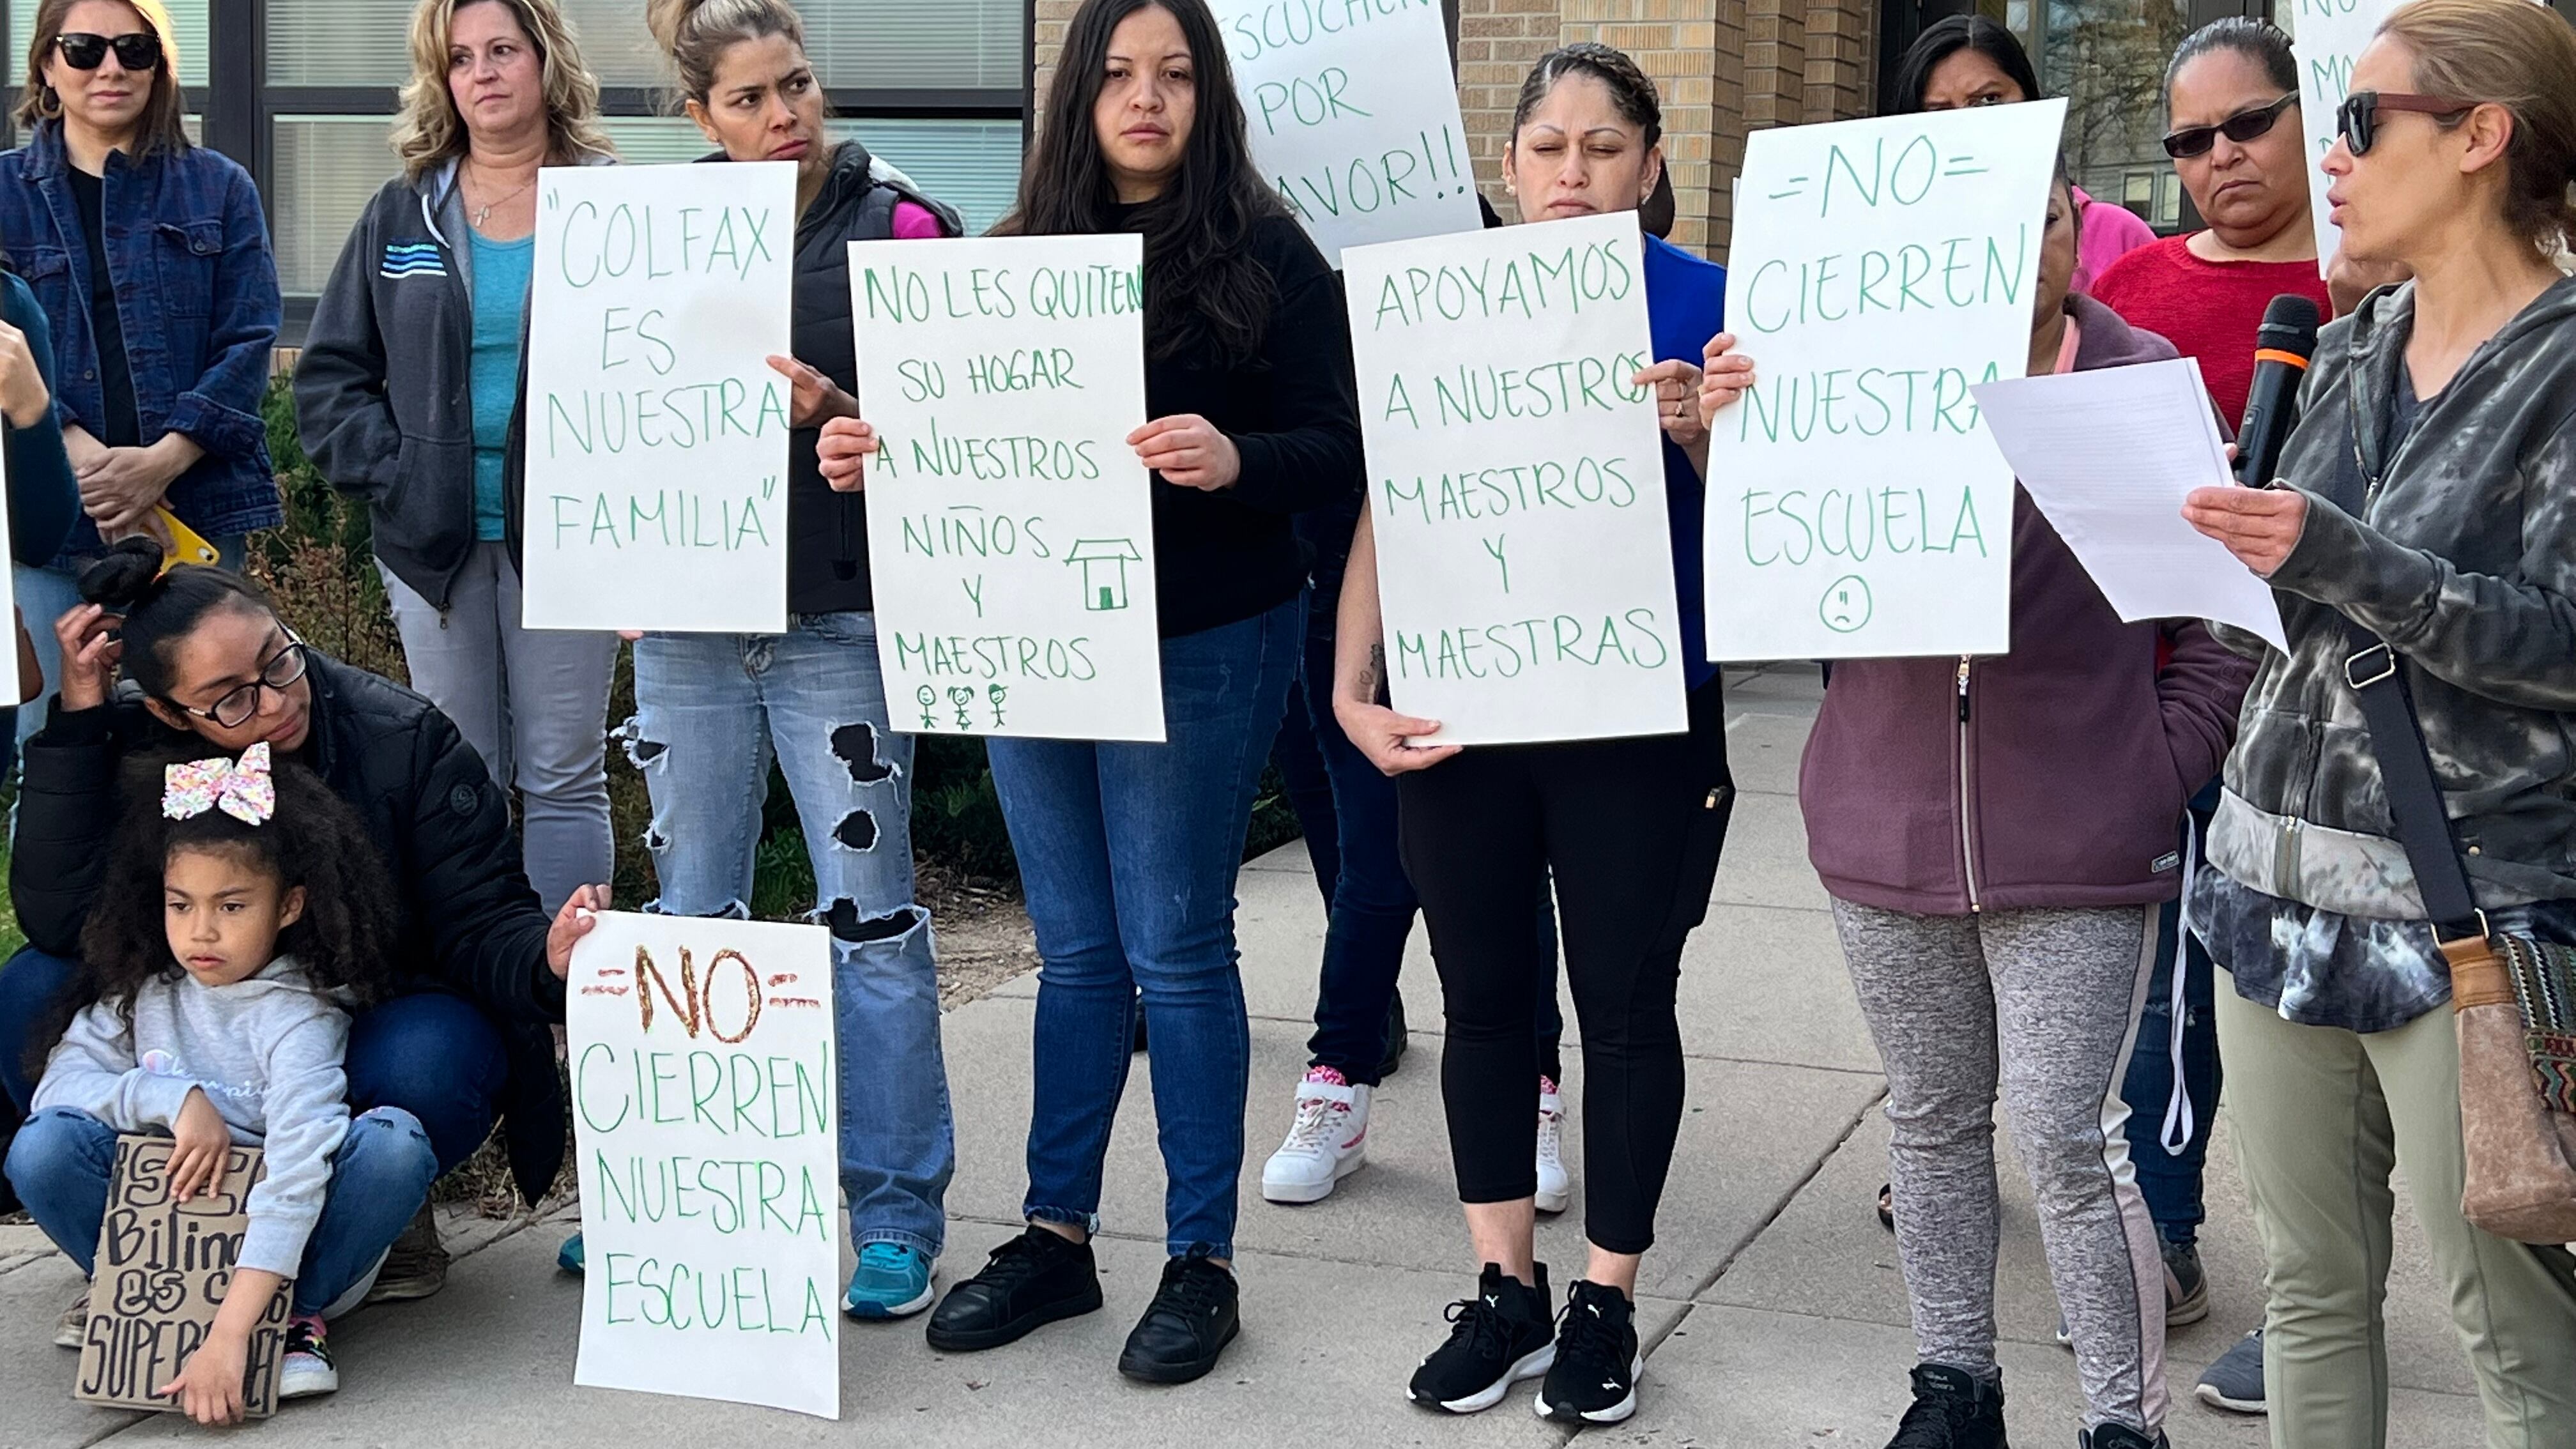 A group of women stand outside an elementary school. They hold signs that say “Don’t Close Our School,” “Colfax is Our Family,” and “DPS, Please Listen” in Spanish.